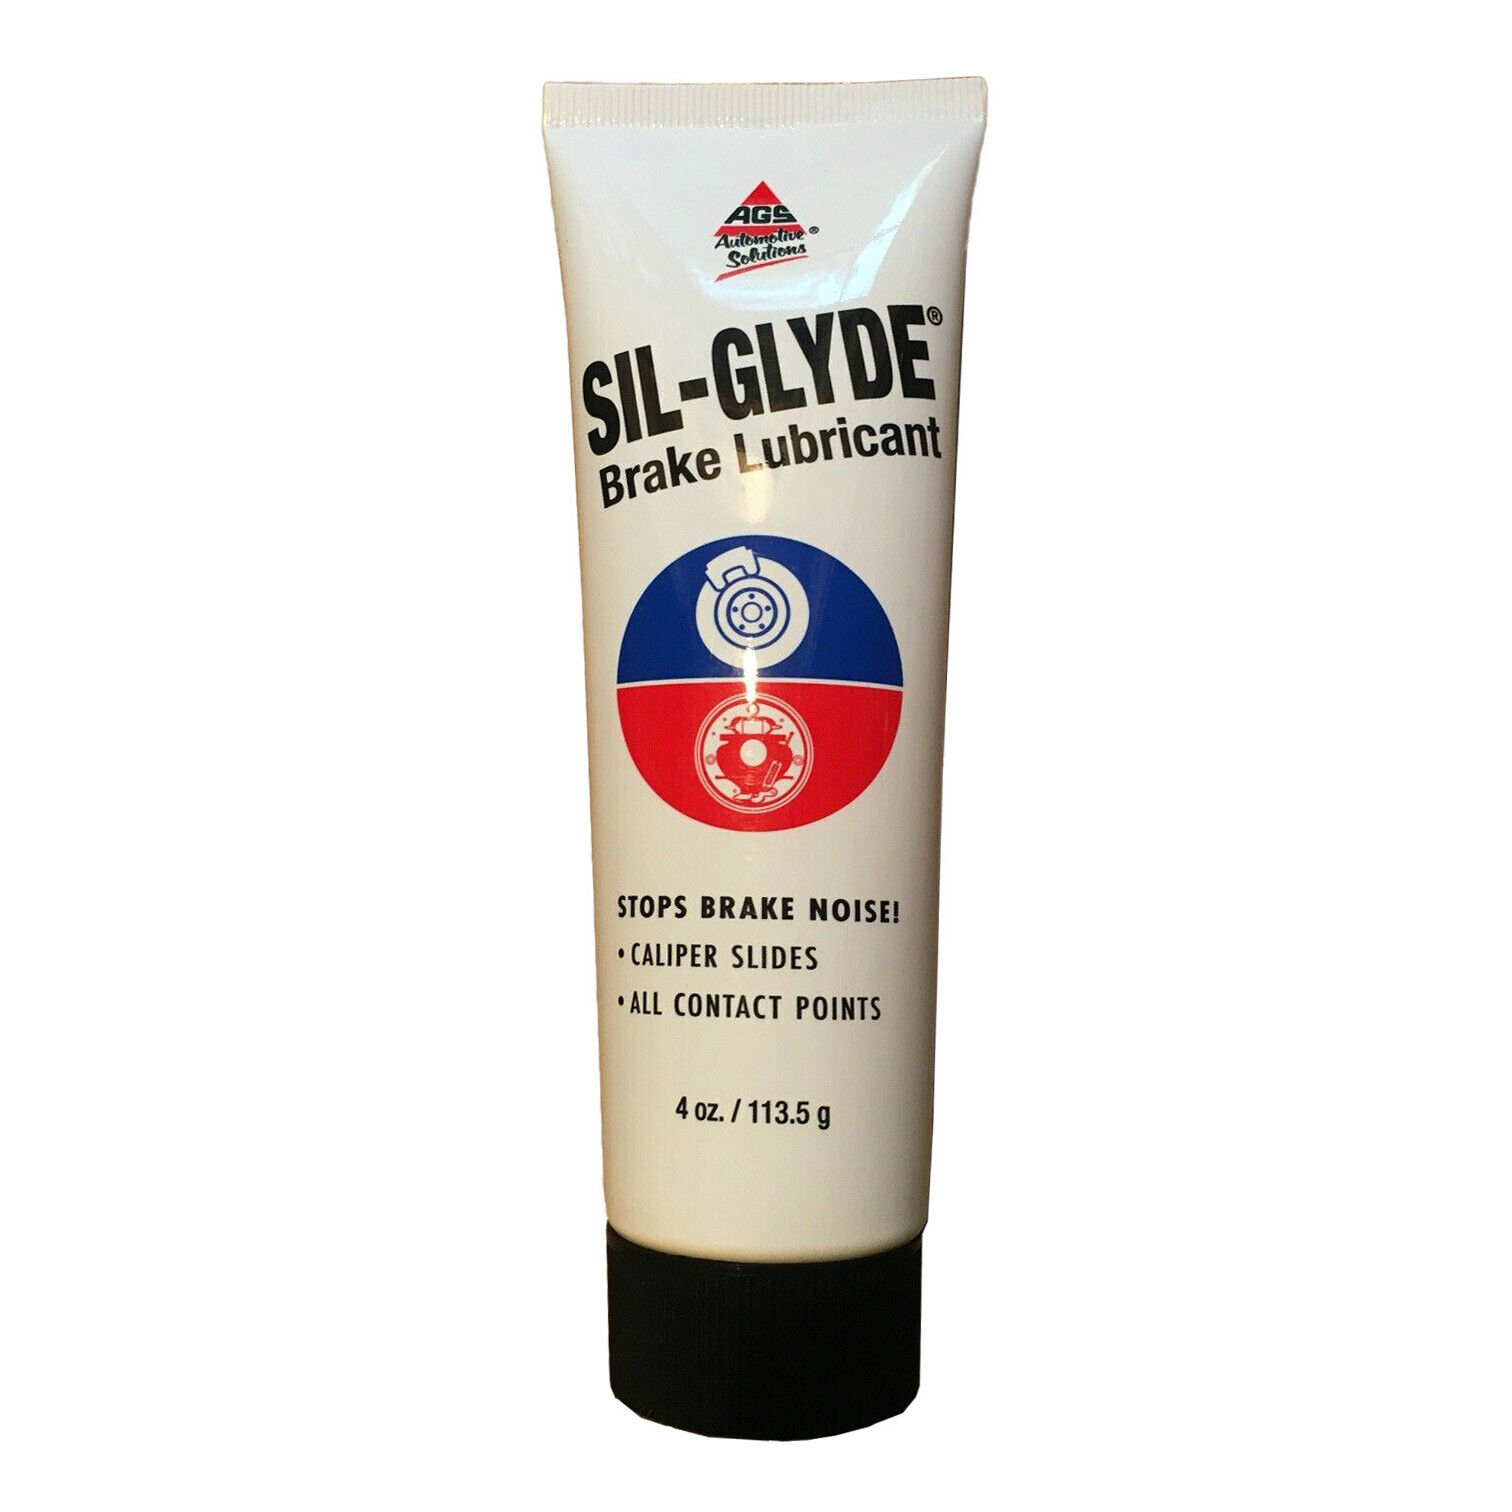 Ags sil glyde brake lubricant